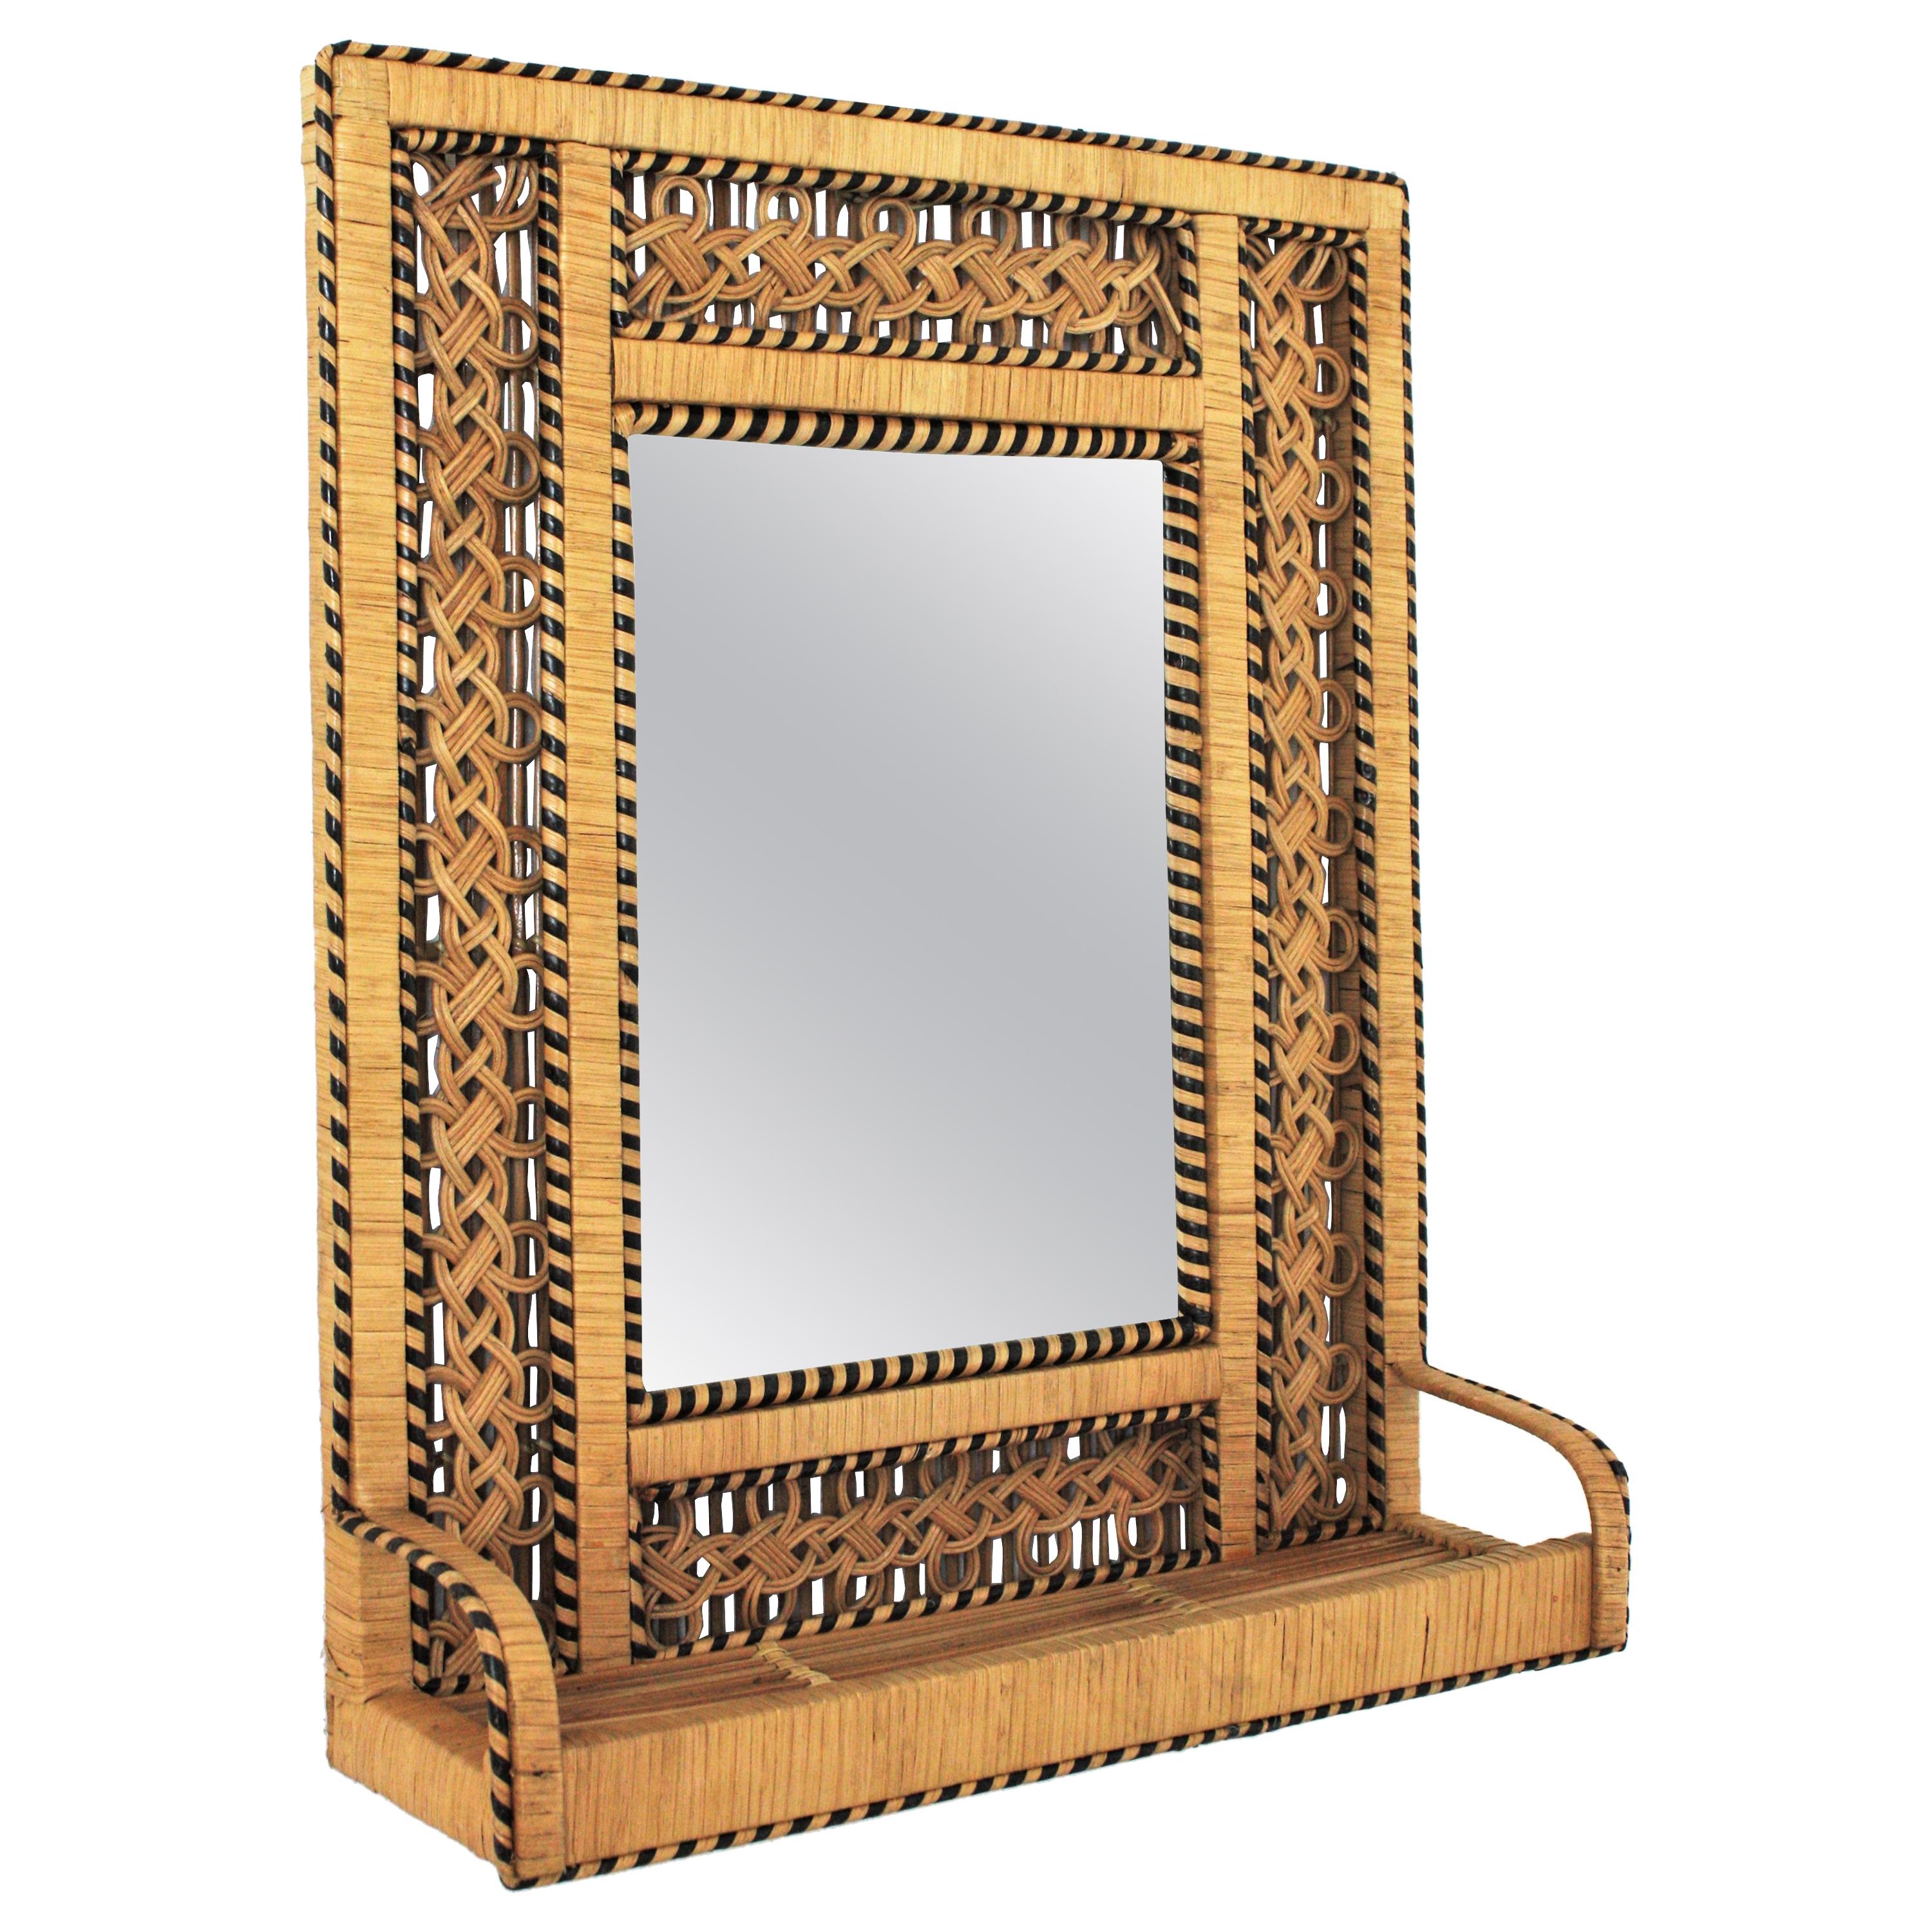 Rattan and Woven Wicker Mirror Shelf with Filigree Frame, 1960s